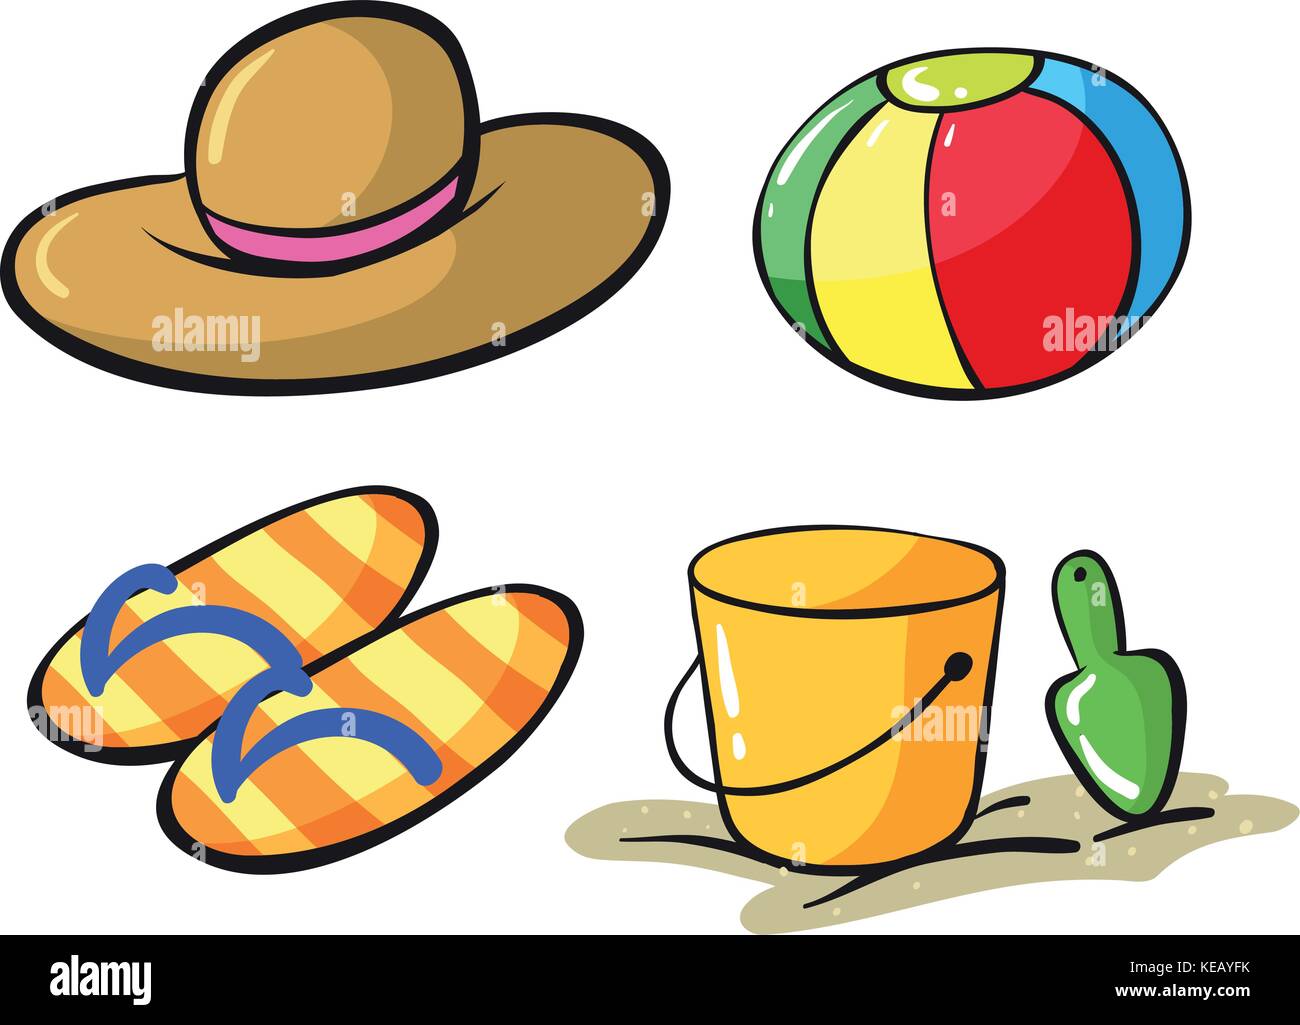 Objects on beach Stock Vector Images - Alamy